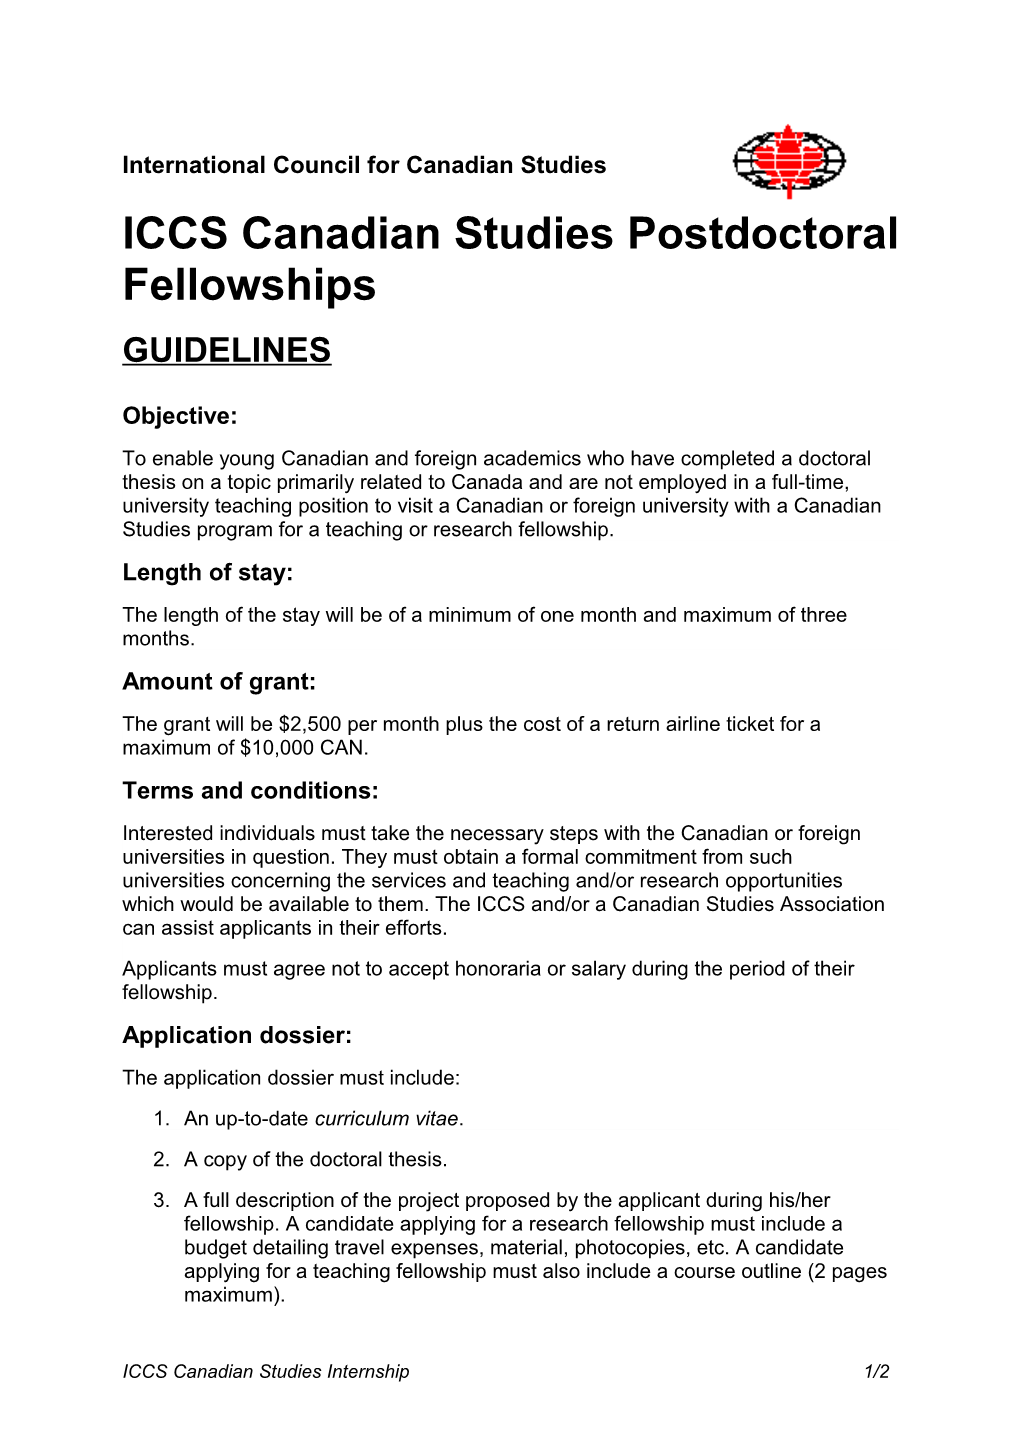 International Council for Canadian Studies (ICCS)